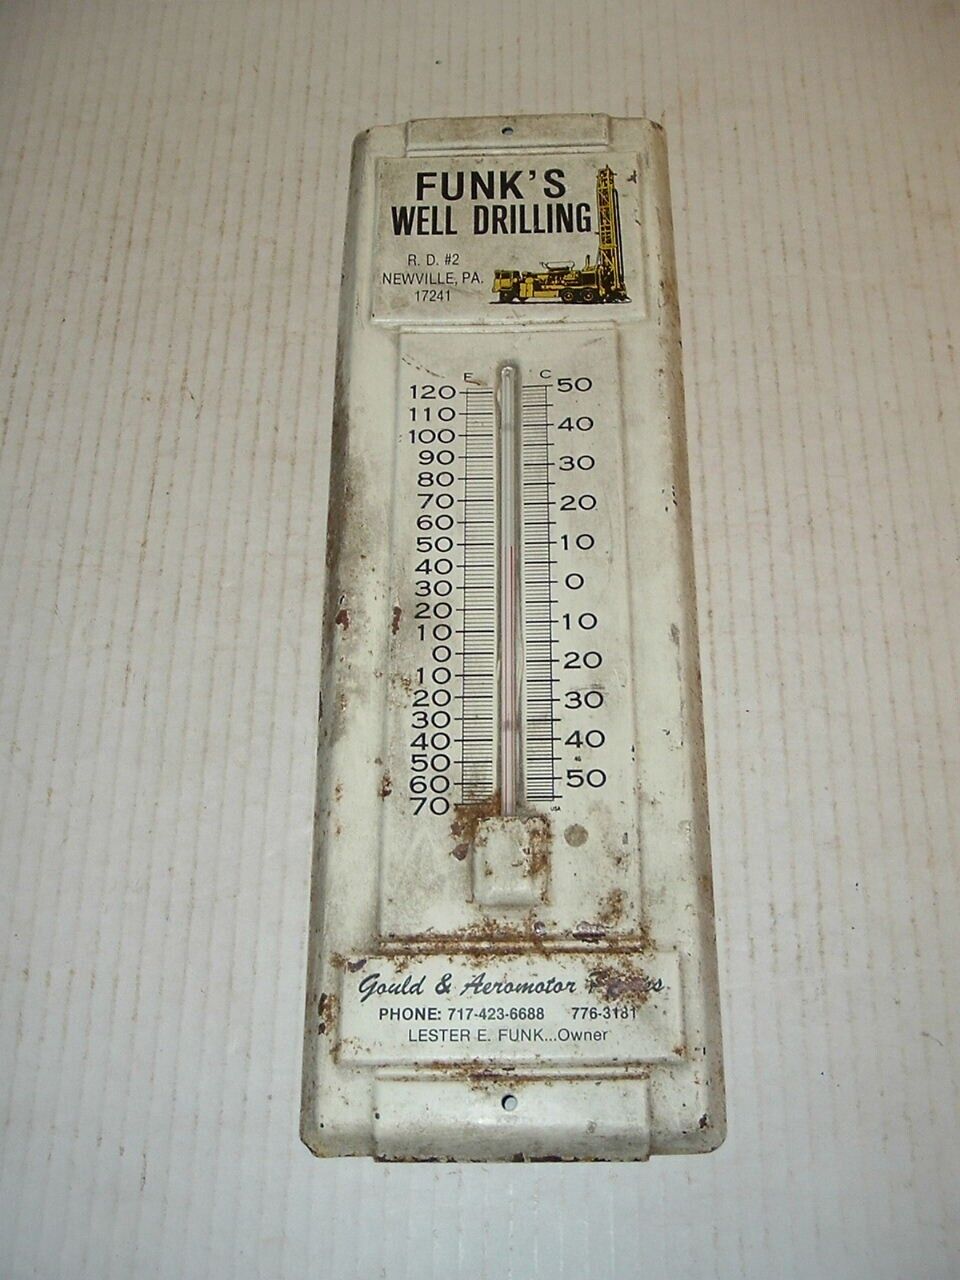 Vintage Funk's Well Drilling Metal Advertising Thermometer Newville Pa 14